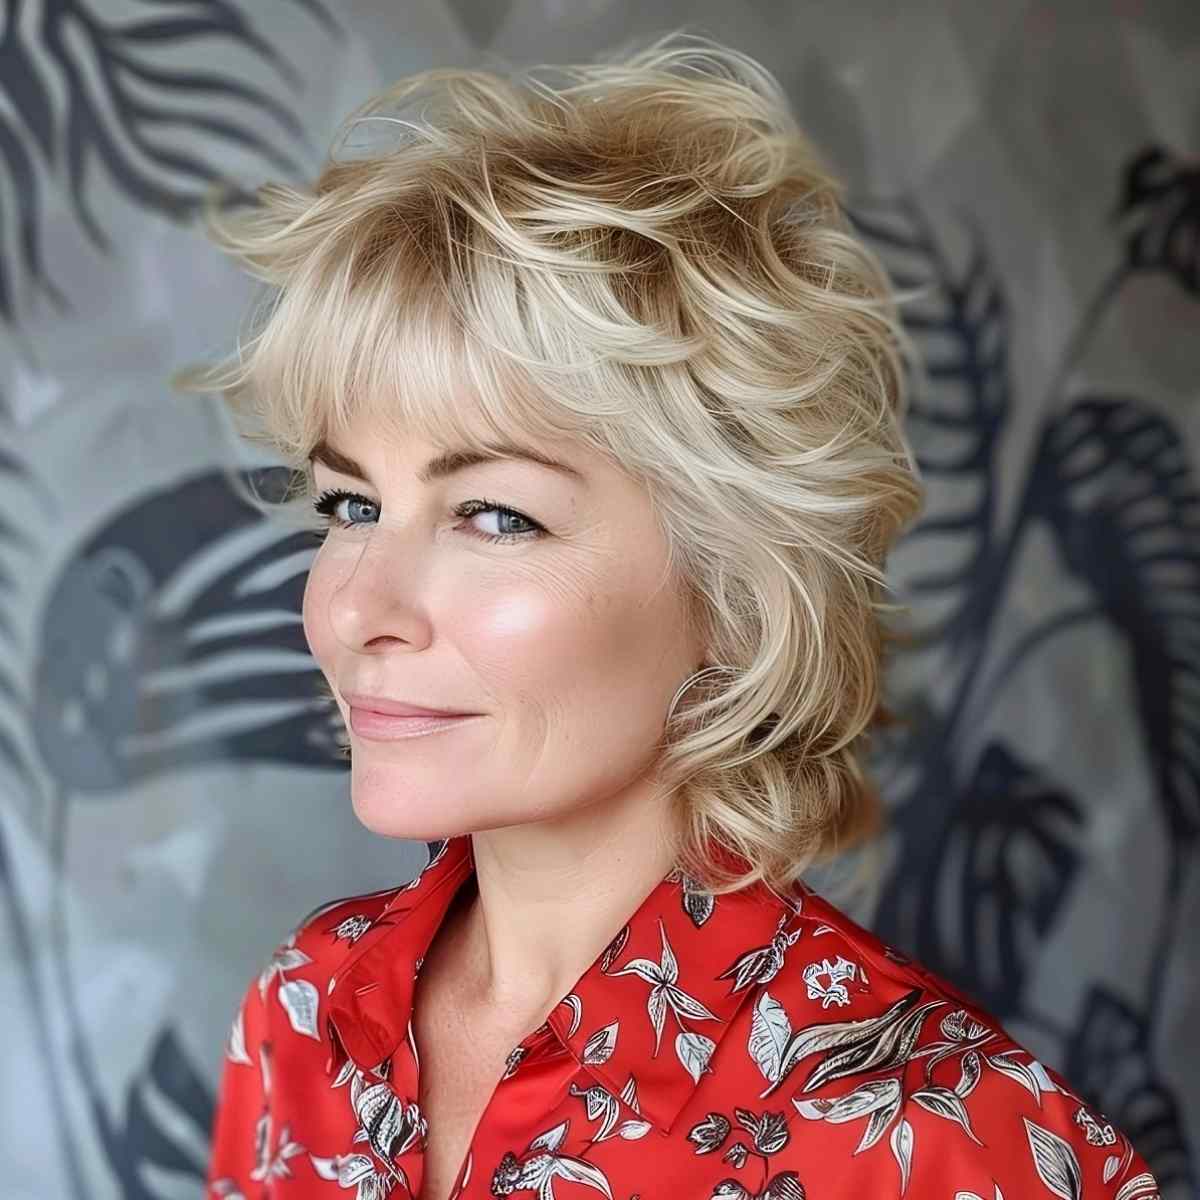 Retro Shaggy Mullet for Ladies Over 40